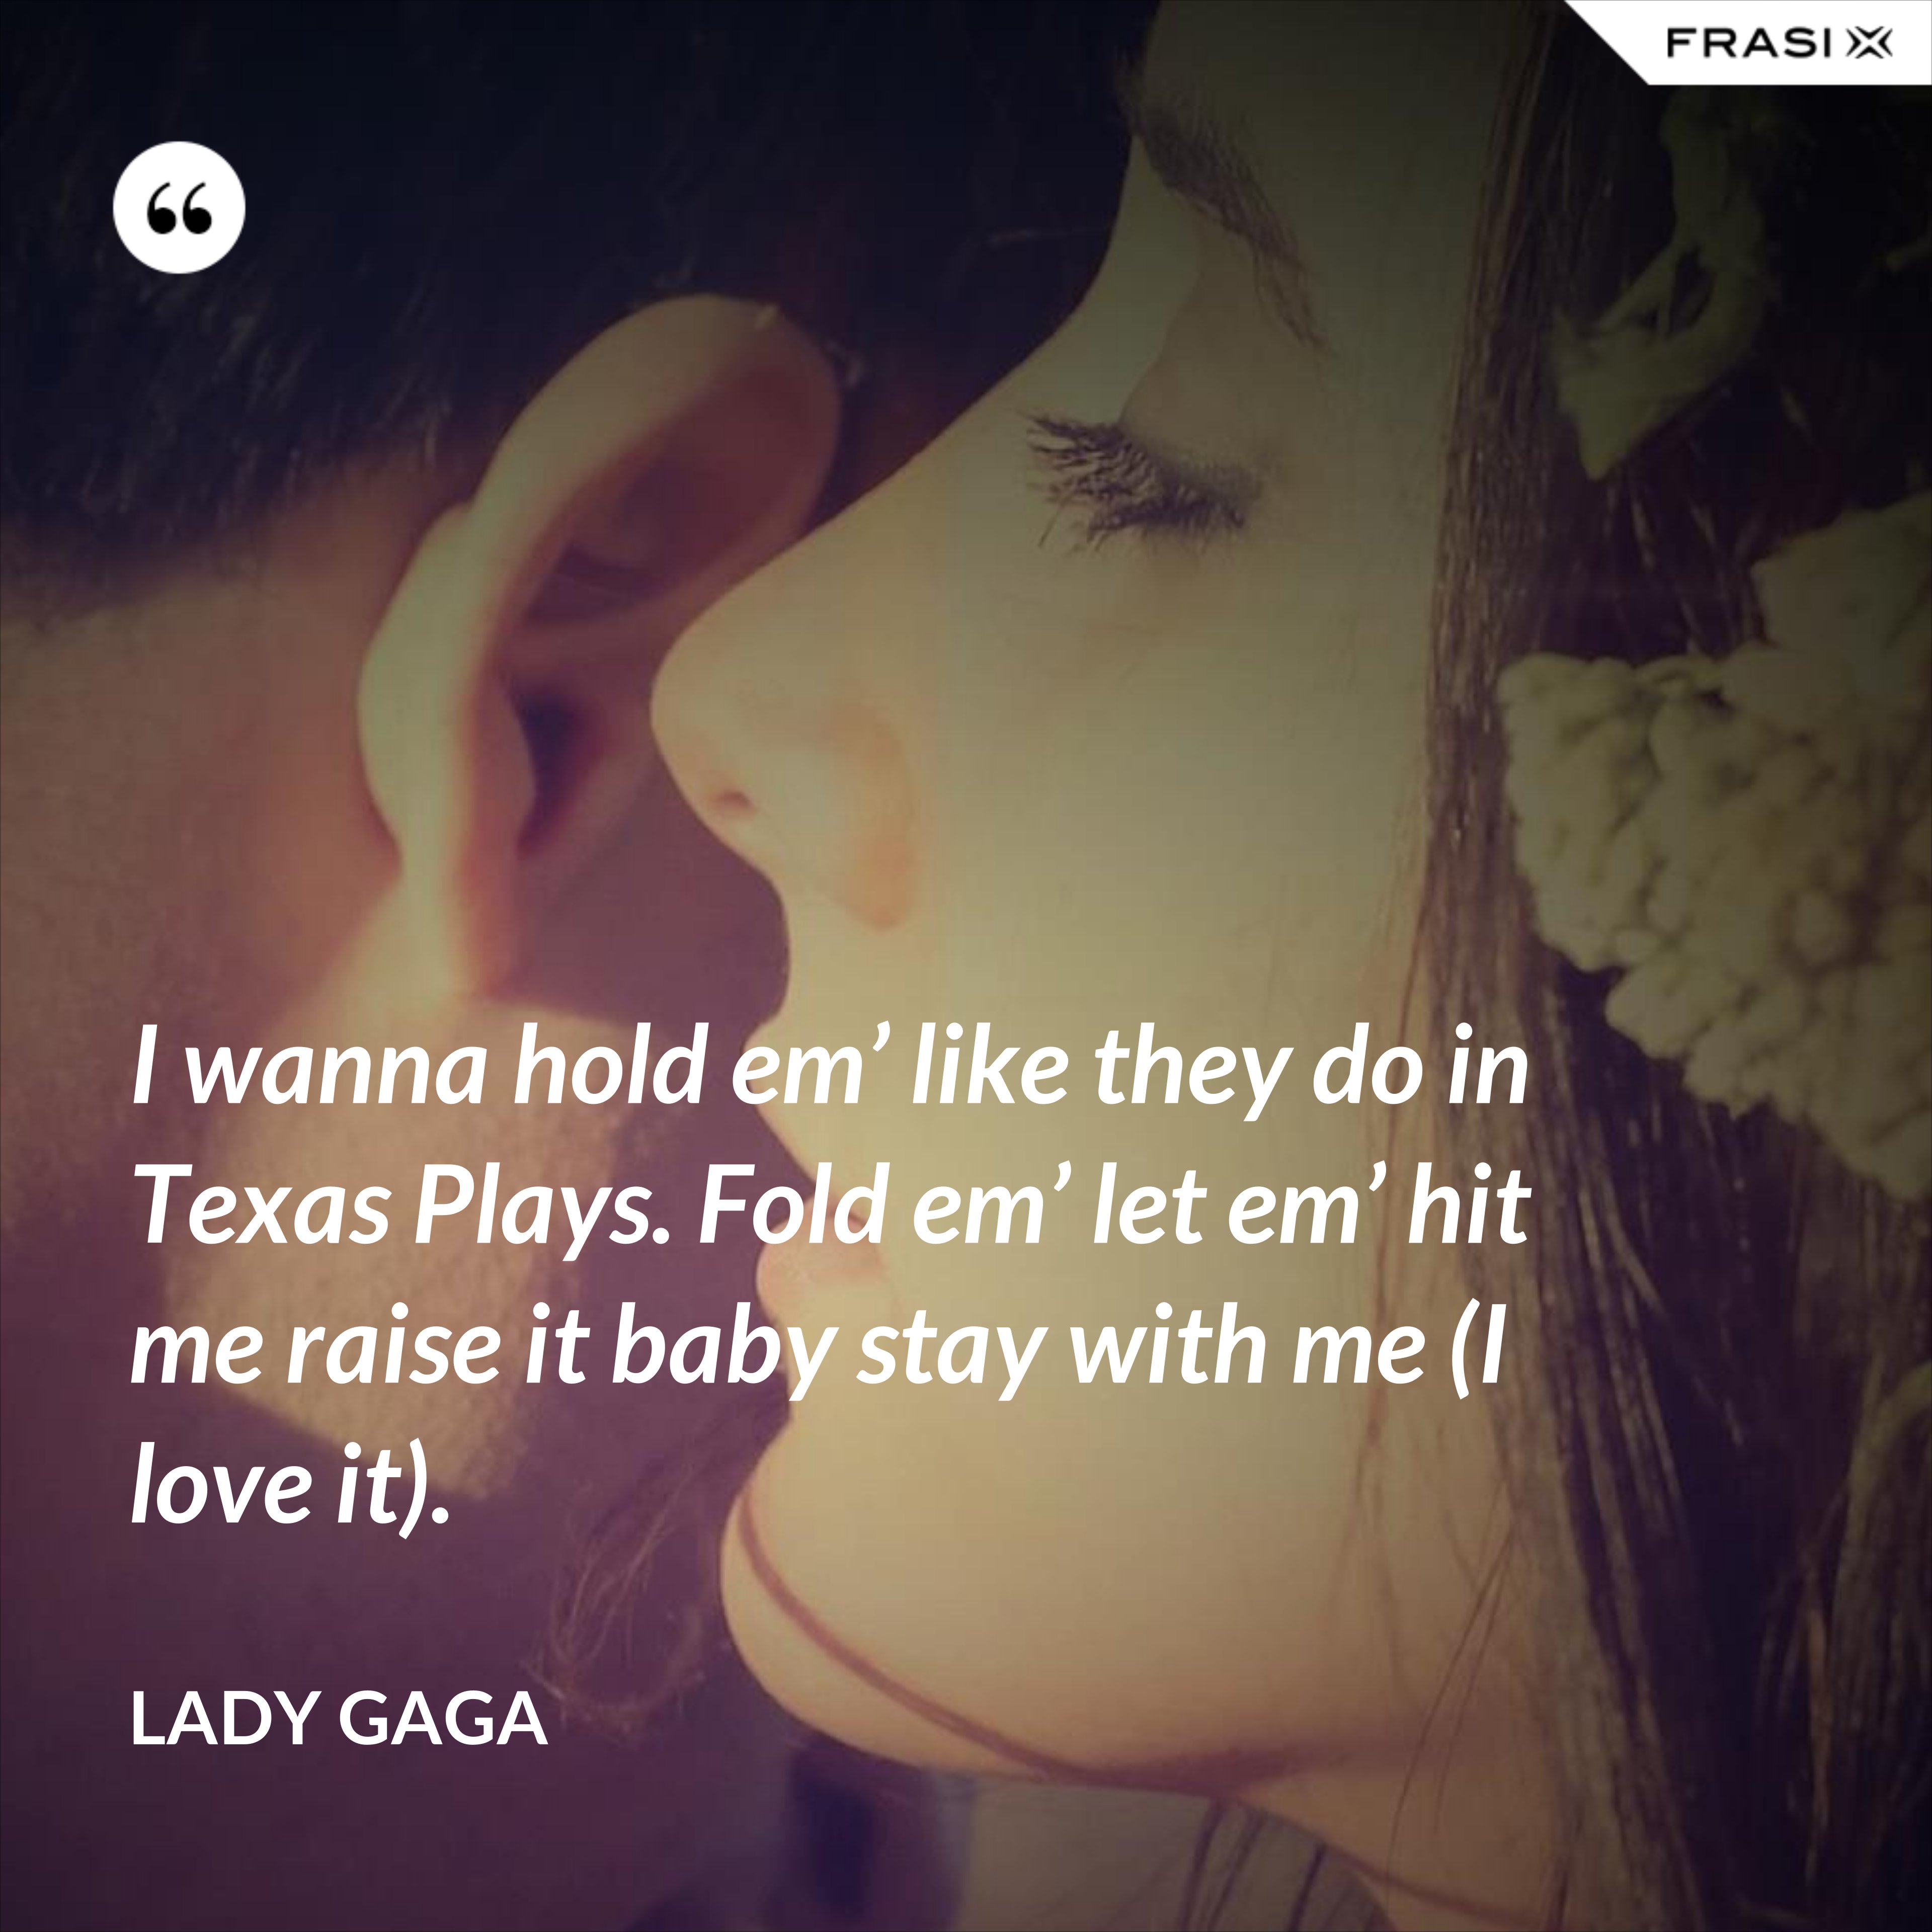 I wanna hold em’ like they do in Texas Plays. Fold em’ let em’ hit me raise it baby stay with me (I love it). - Lady Gaga